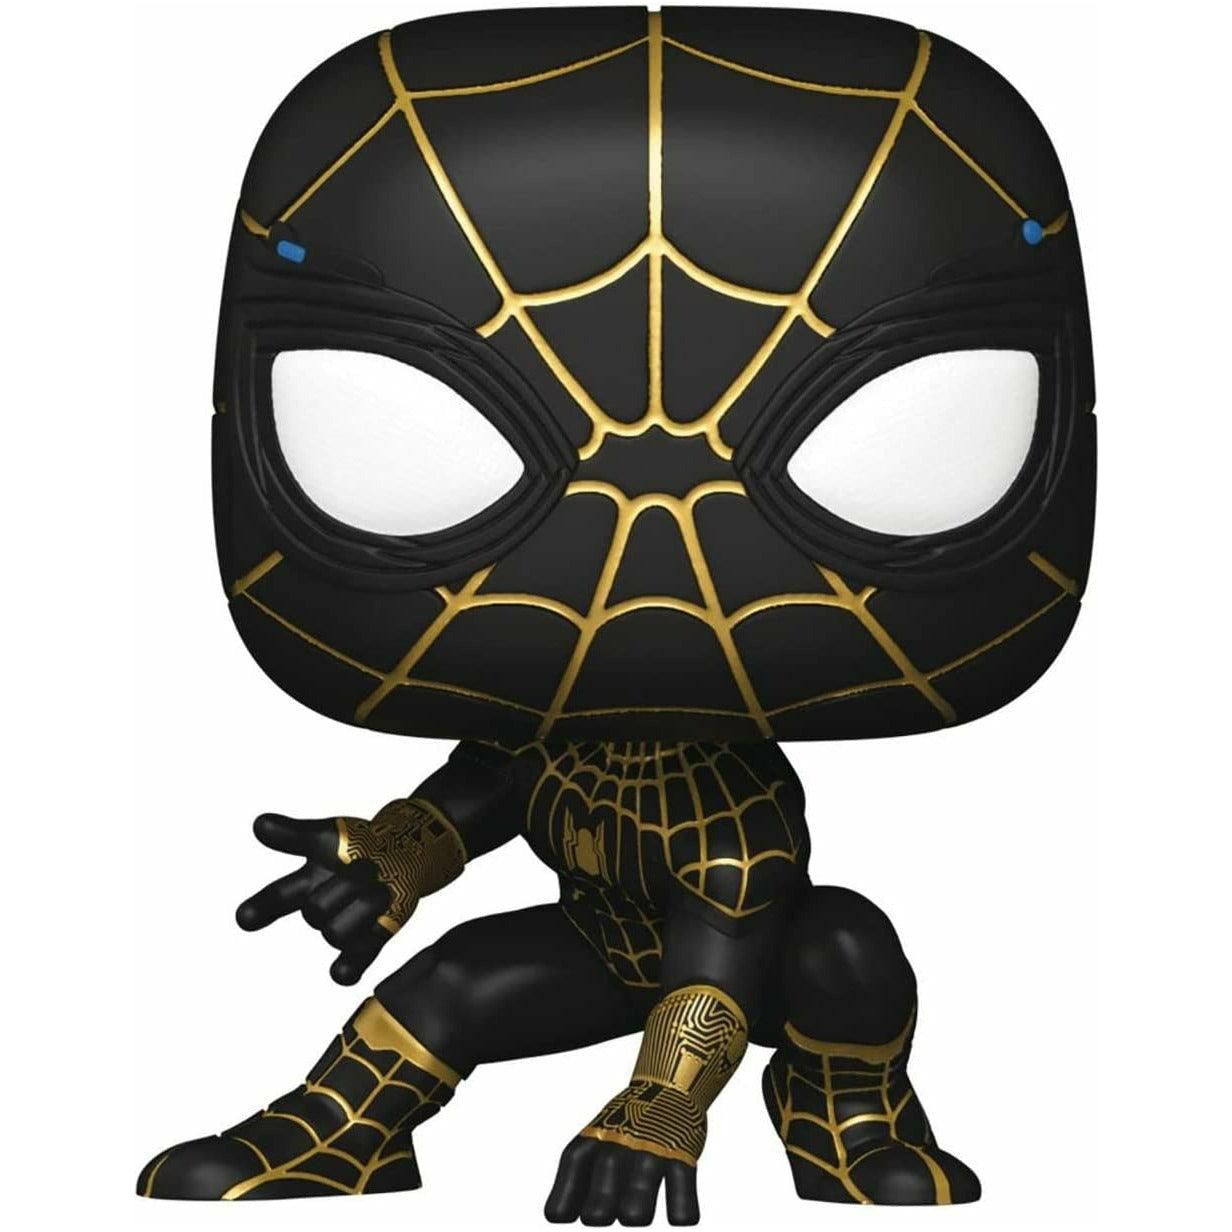 Funko Pop! Marvel Spider-Man Spiderman in Black and Gold Suit - BumbleToys - 18+, 4+ Years, 5-7 Years, Action Figures, Avengers, Boys, Characters, Funko, Pre-Order, Spider man, Spiderman